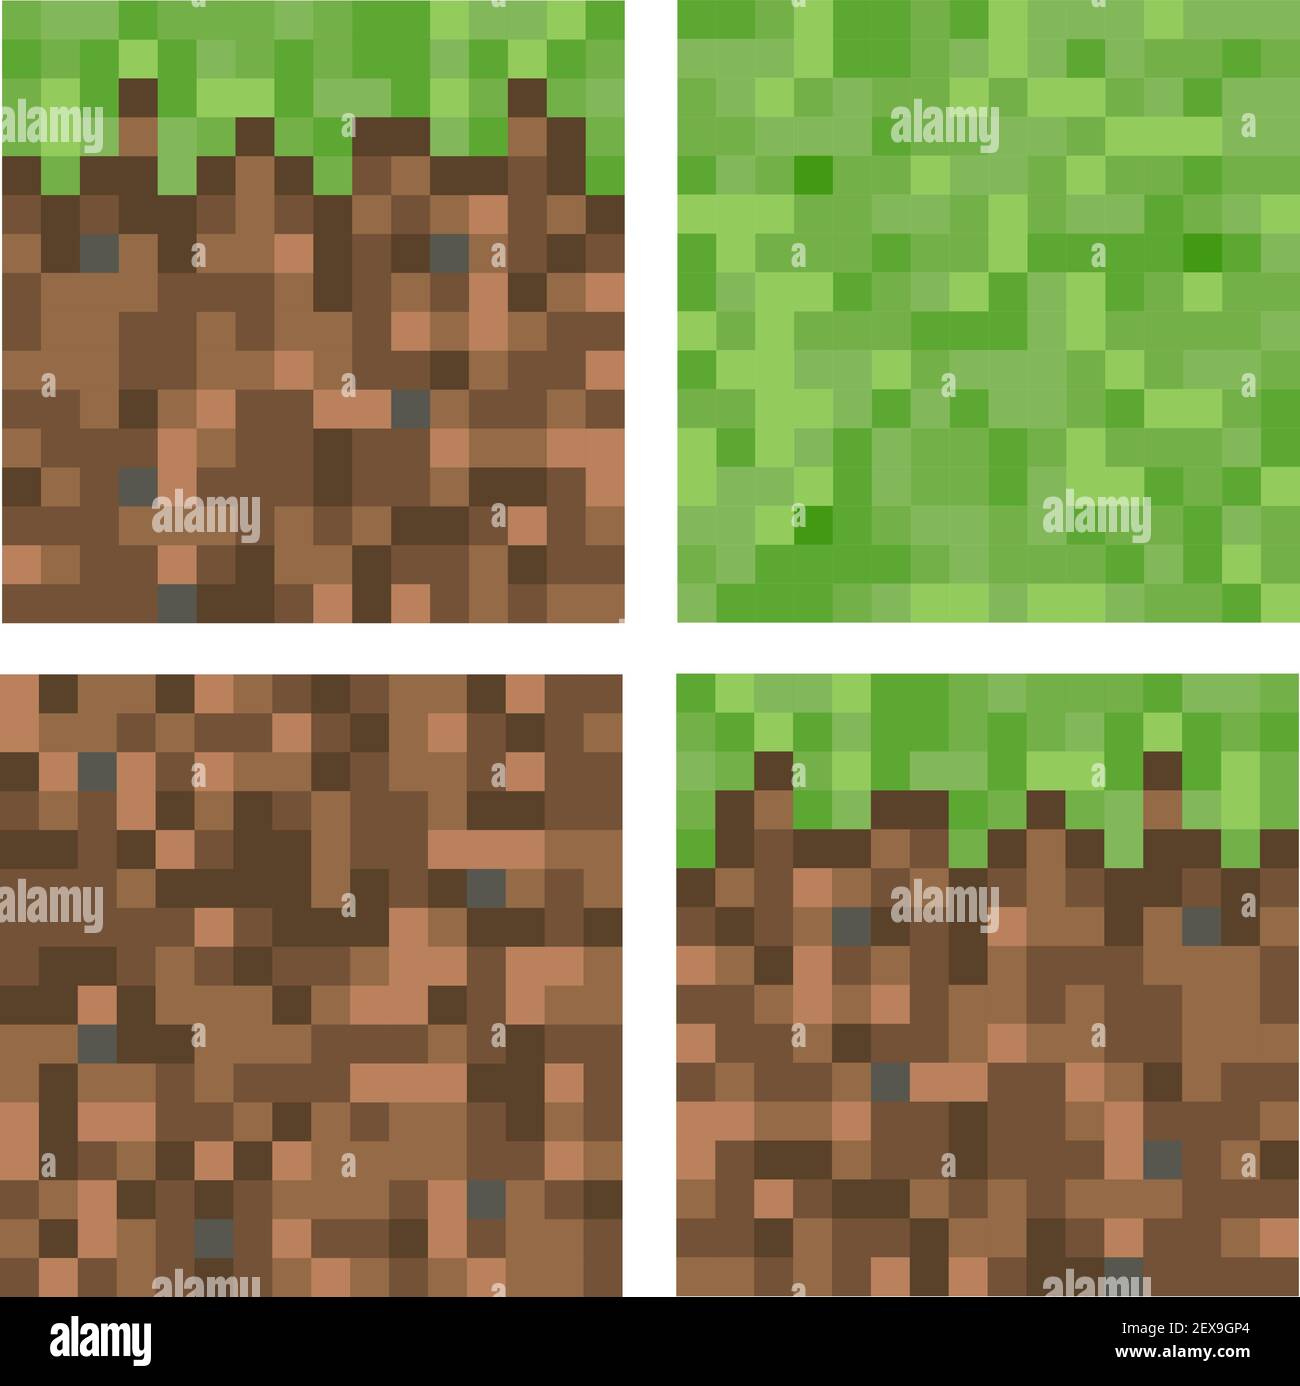 Pixel minecraft style land block background. Concept of game ground pixelated horizontal seamless background. Top, side, bottom view. Isolated Stock Vector